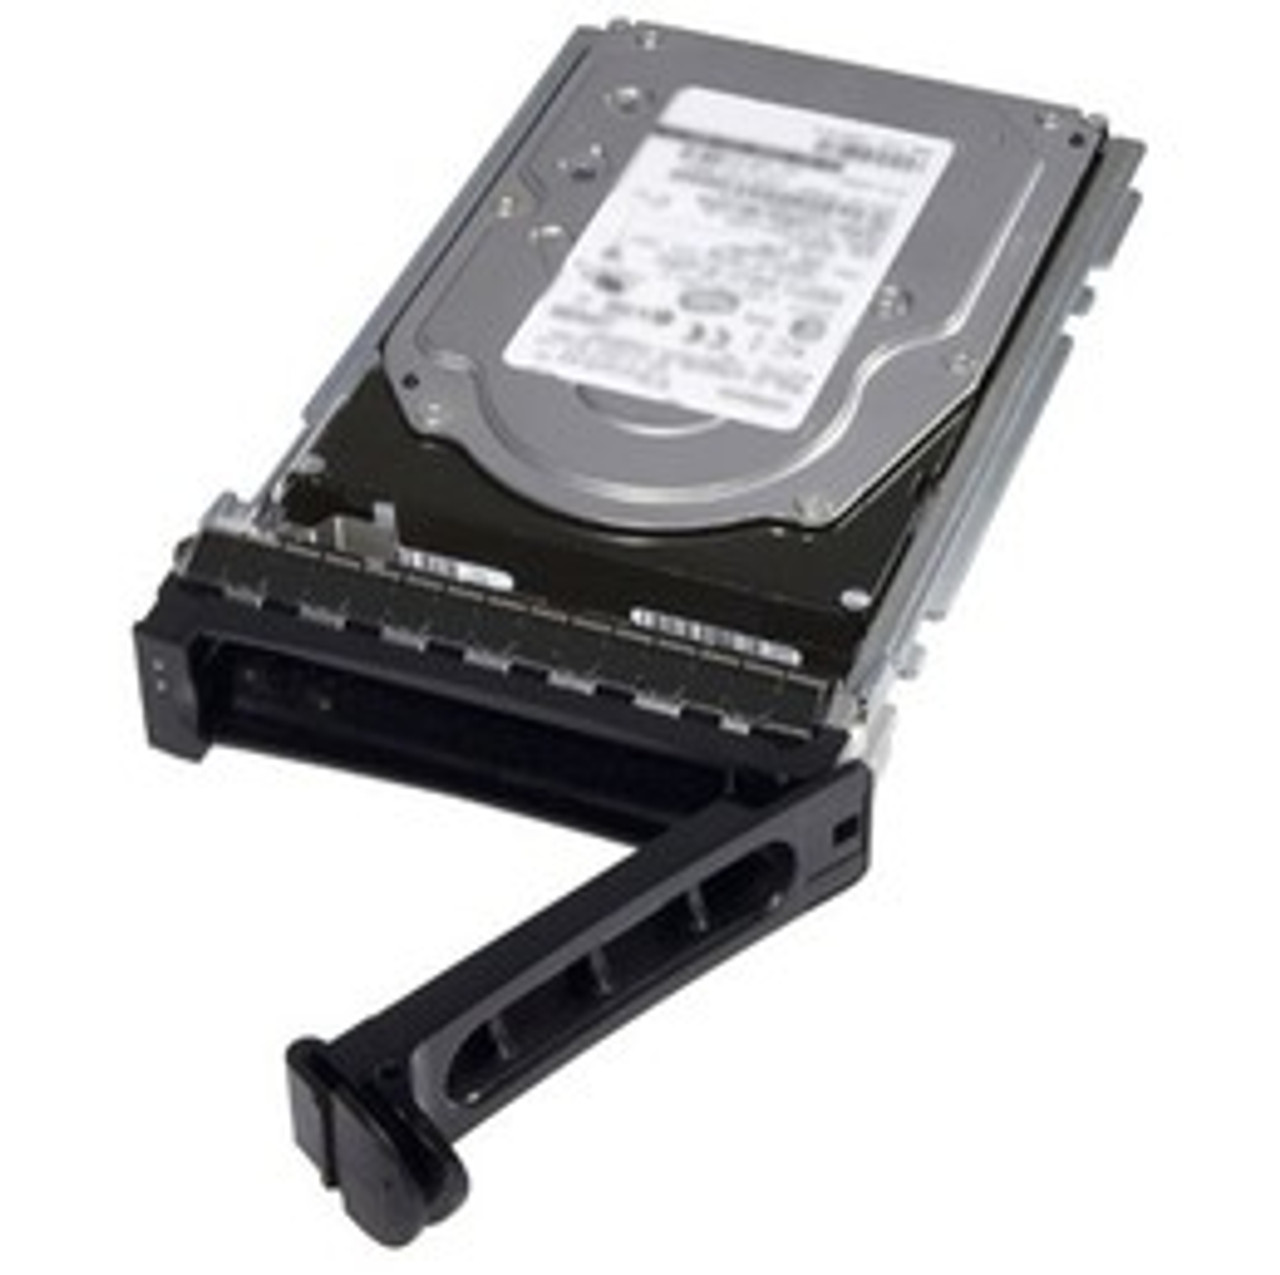 DELL TD653 73gb 15000rpm 80pin Ultra-320 Scsi 3.5inch Low Profile(1.0inch) Hot Swap Hard Disk Drive With Tray